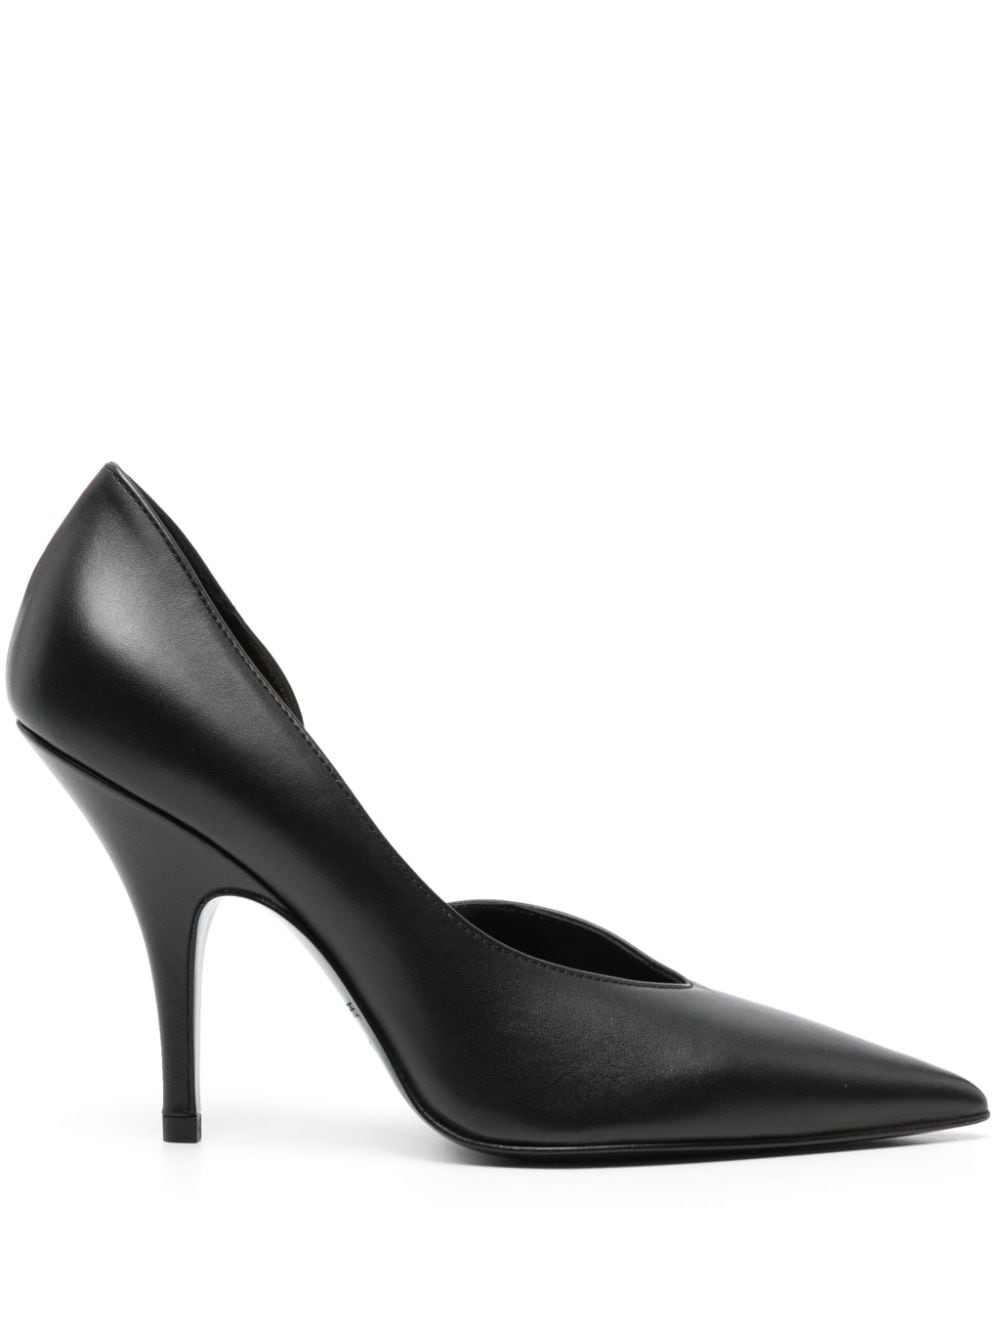 100mm leather pumps